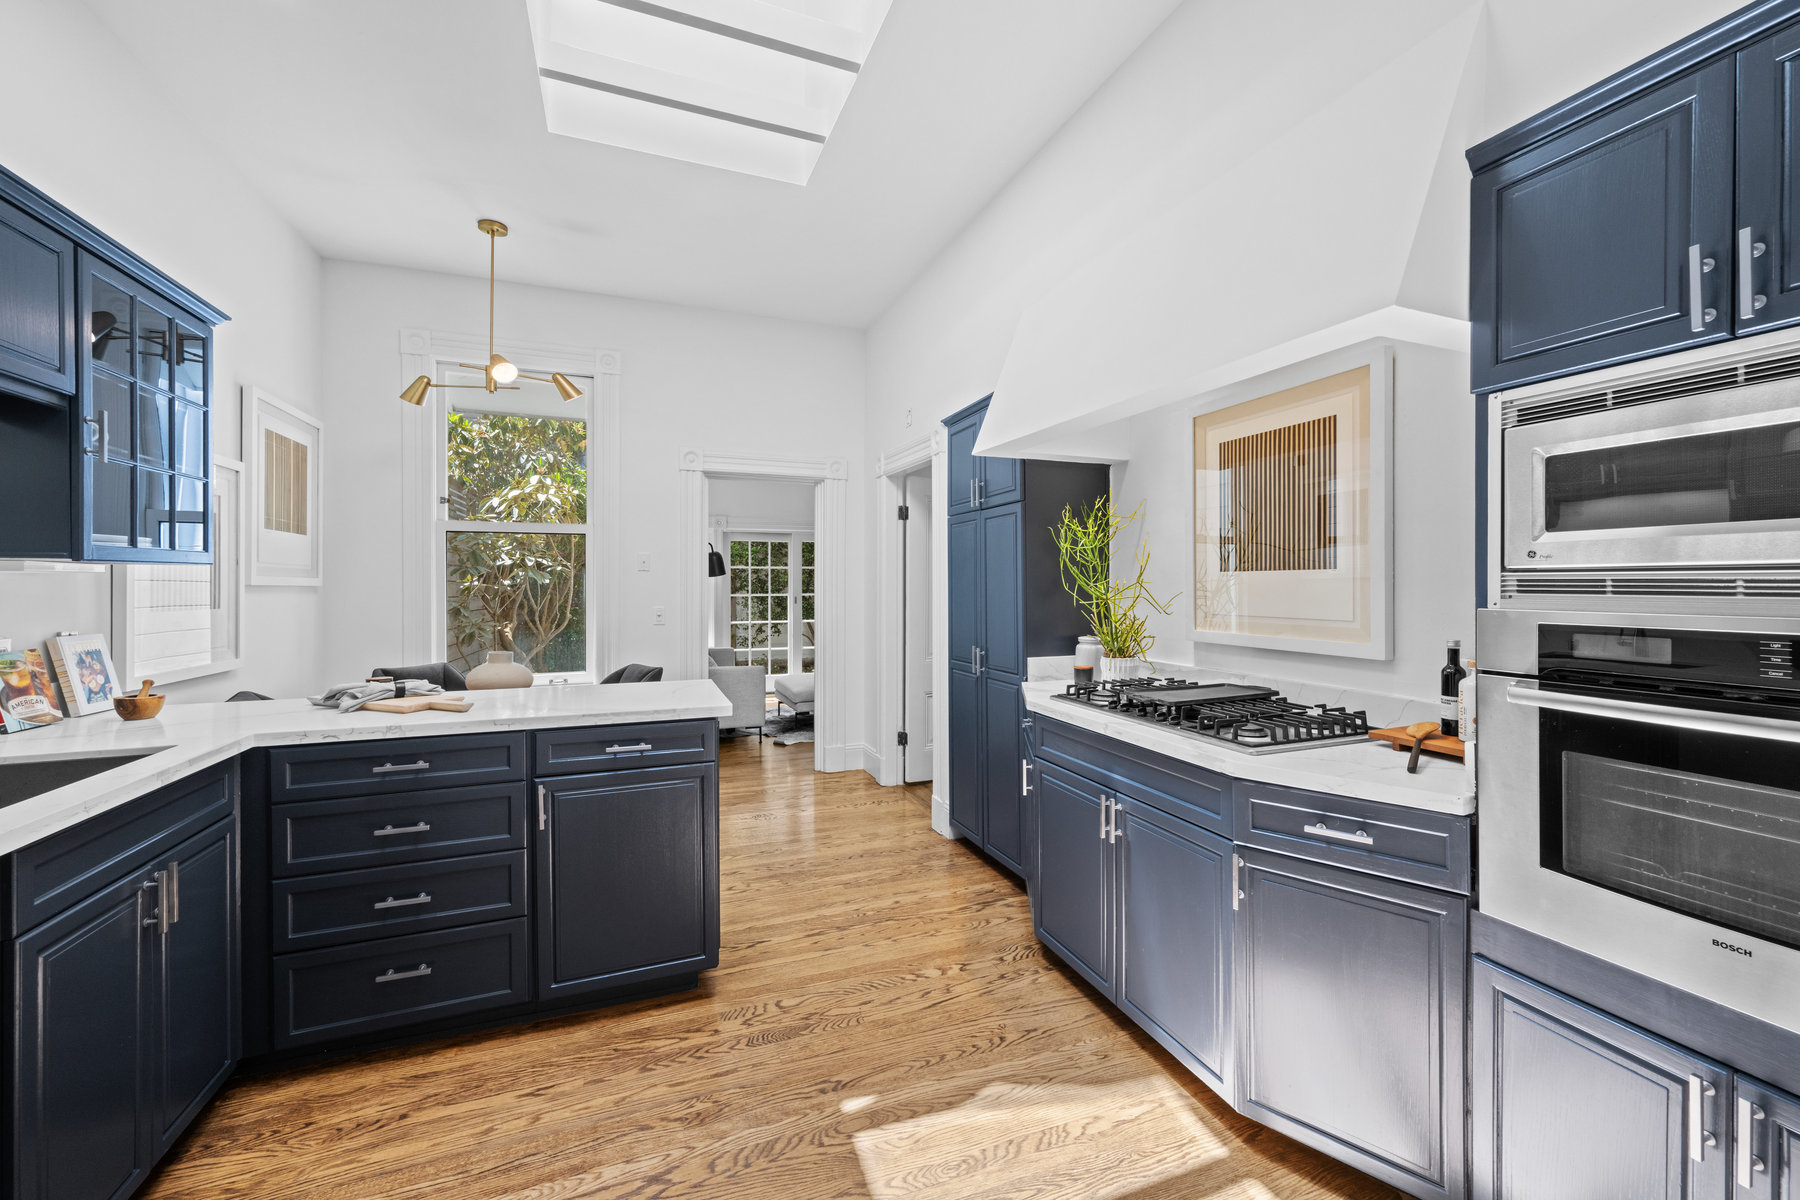 Property Photo: Kitchen has blue cabinets with white stone countertops. There is a skylight that makes room nice and bright, 